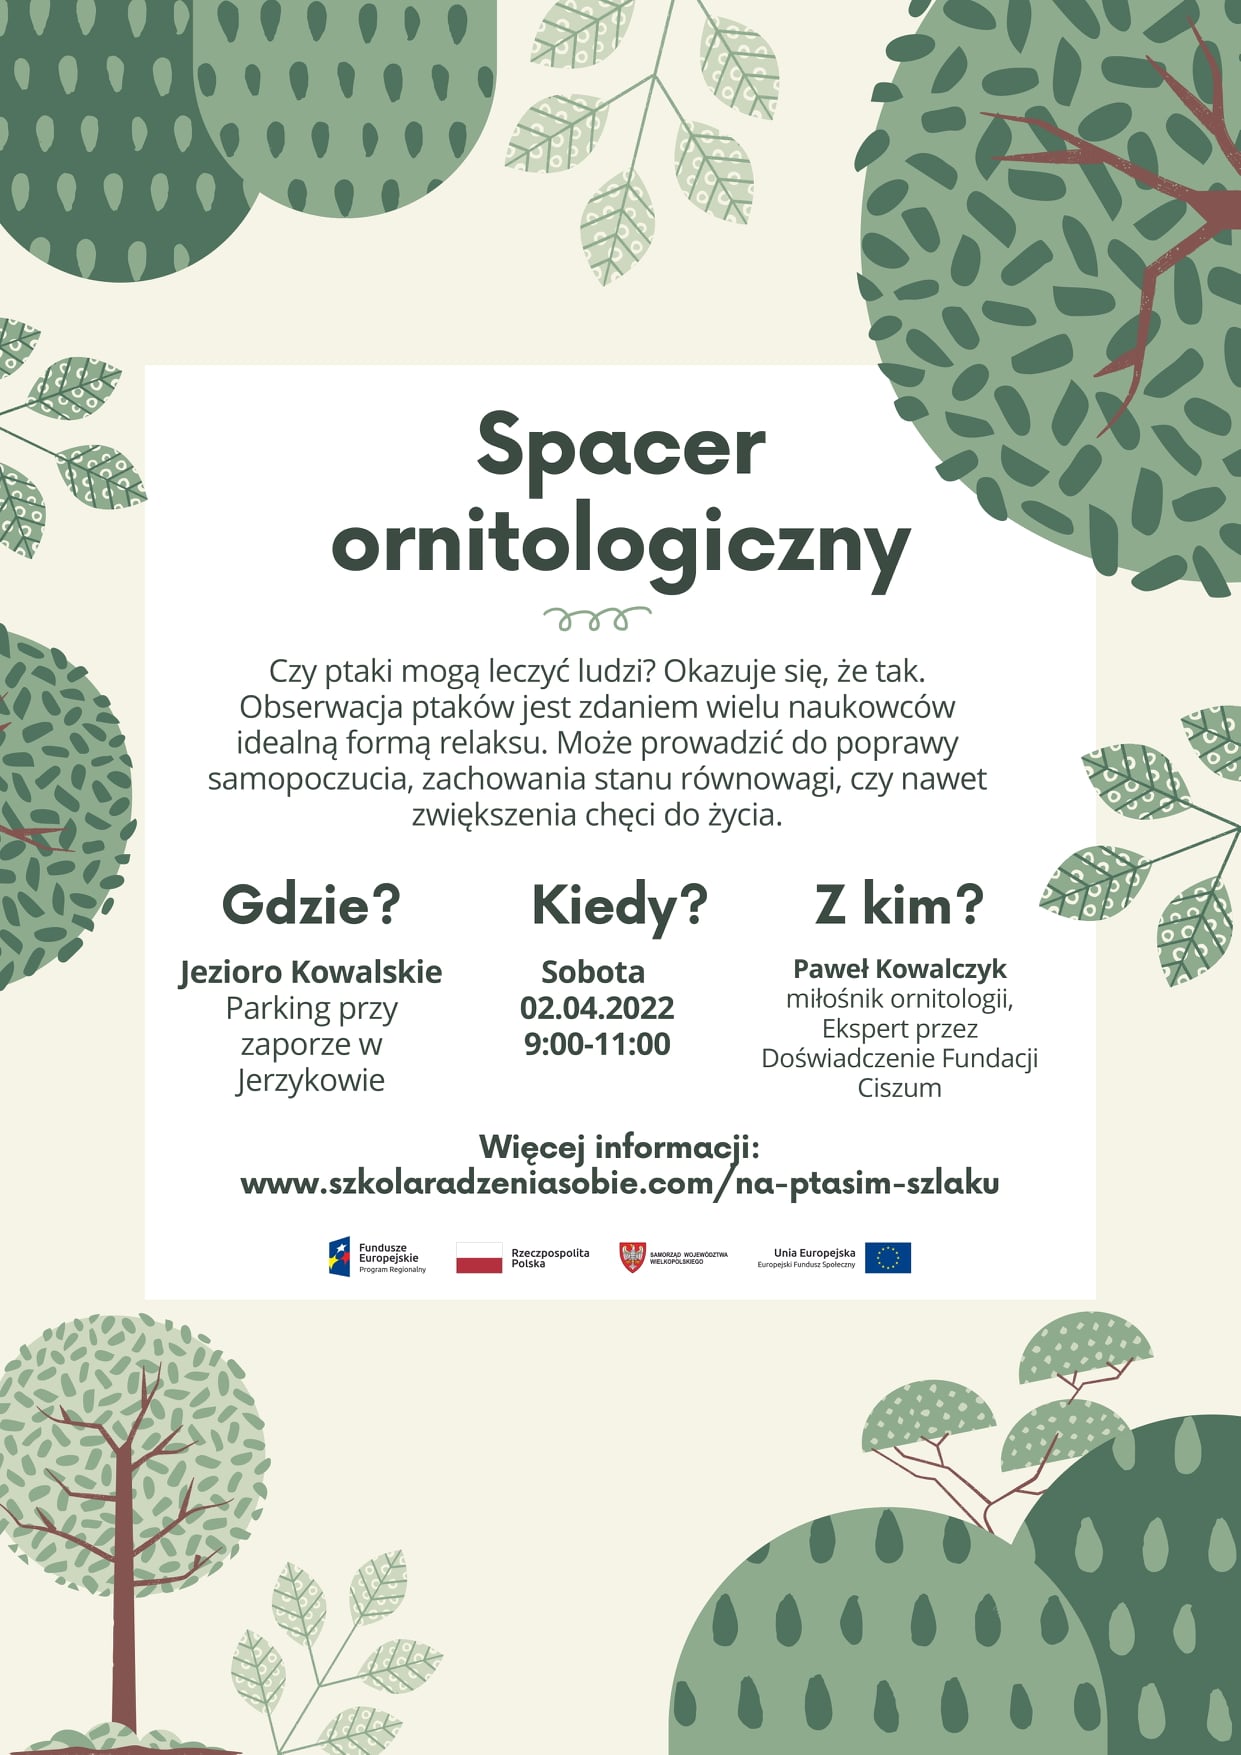 Spacer ornitologiczny